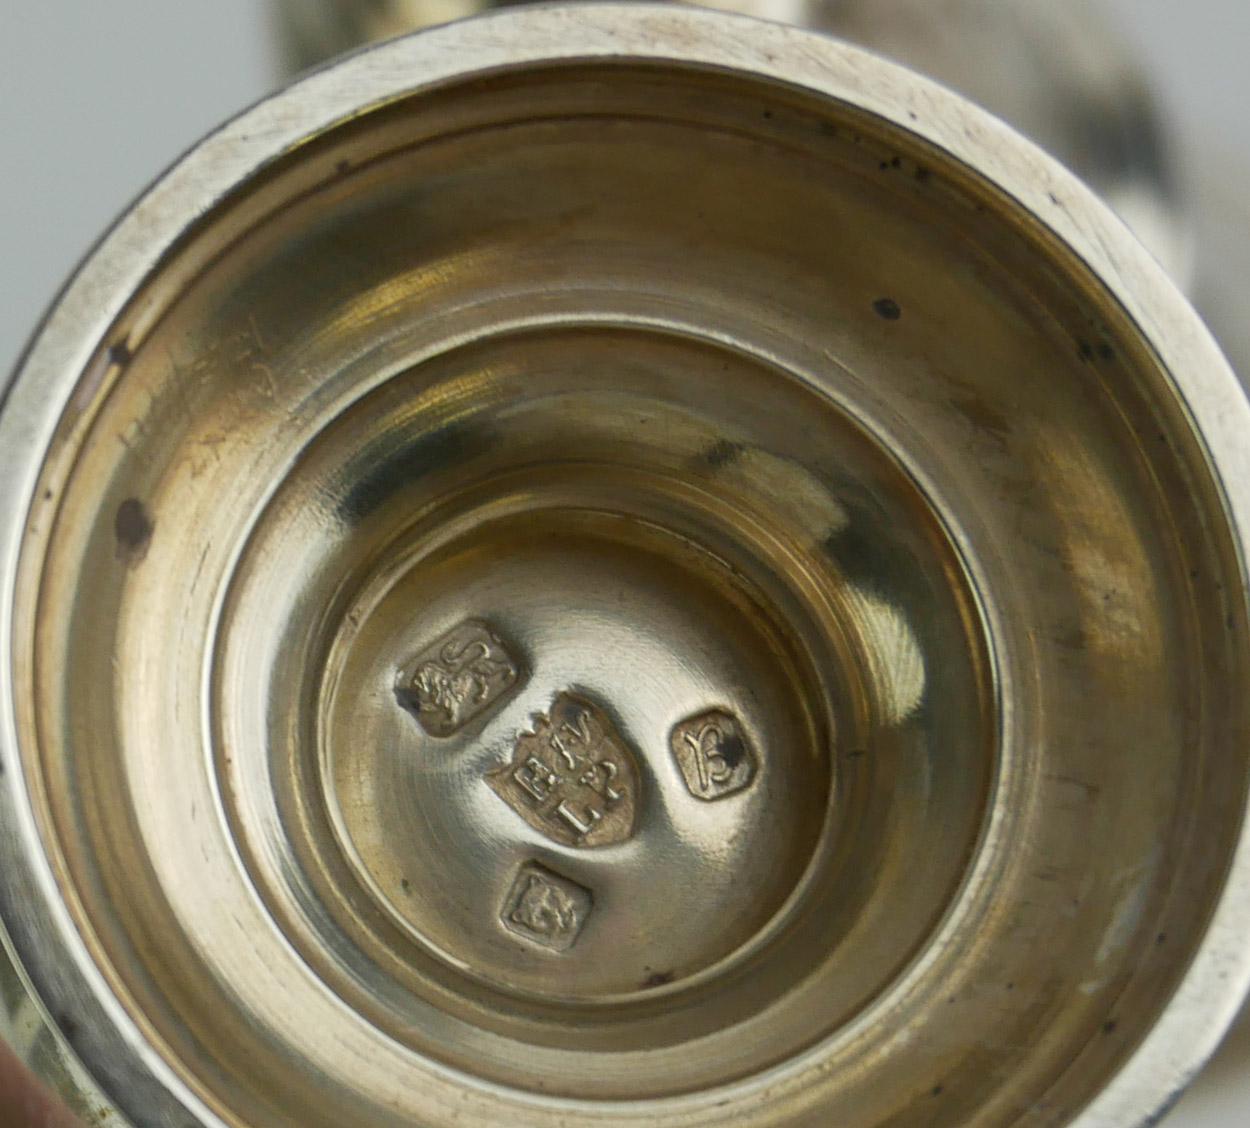 TWO 20TH CENTURY SILVER CASTERS Having a domed lid, on a baluster base, hallmarked London, 1975 - Image 3 of 3